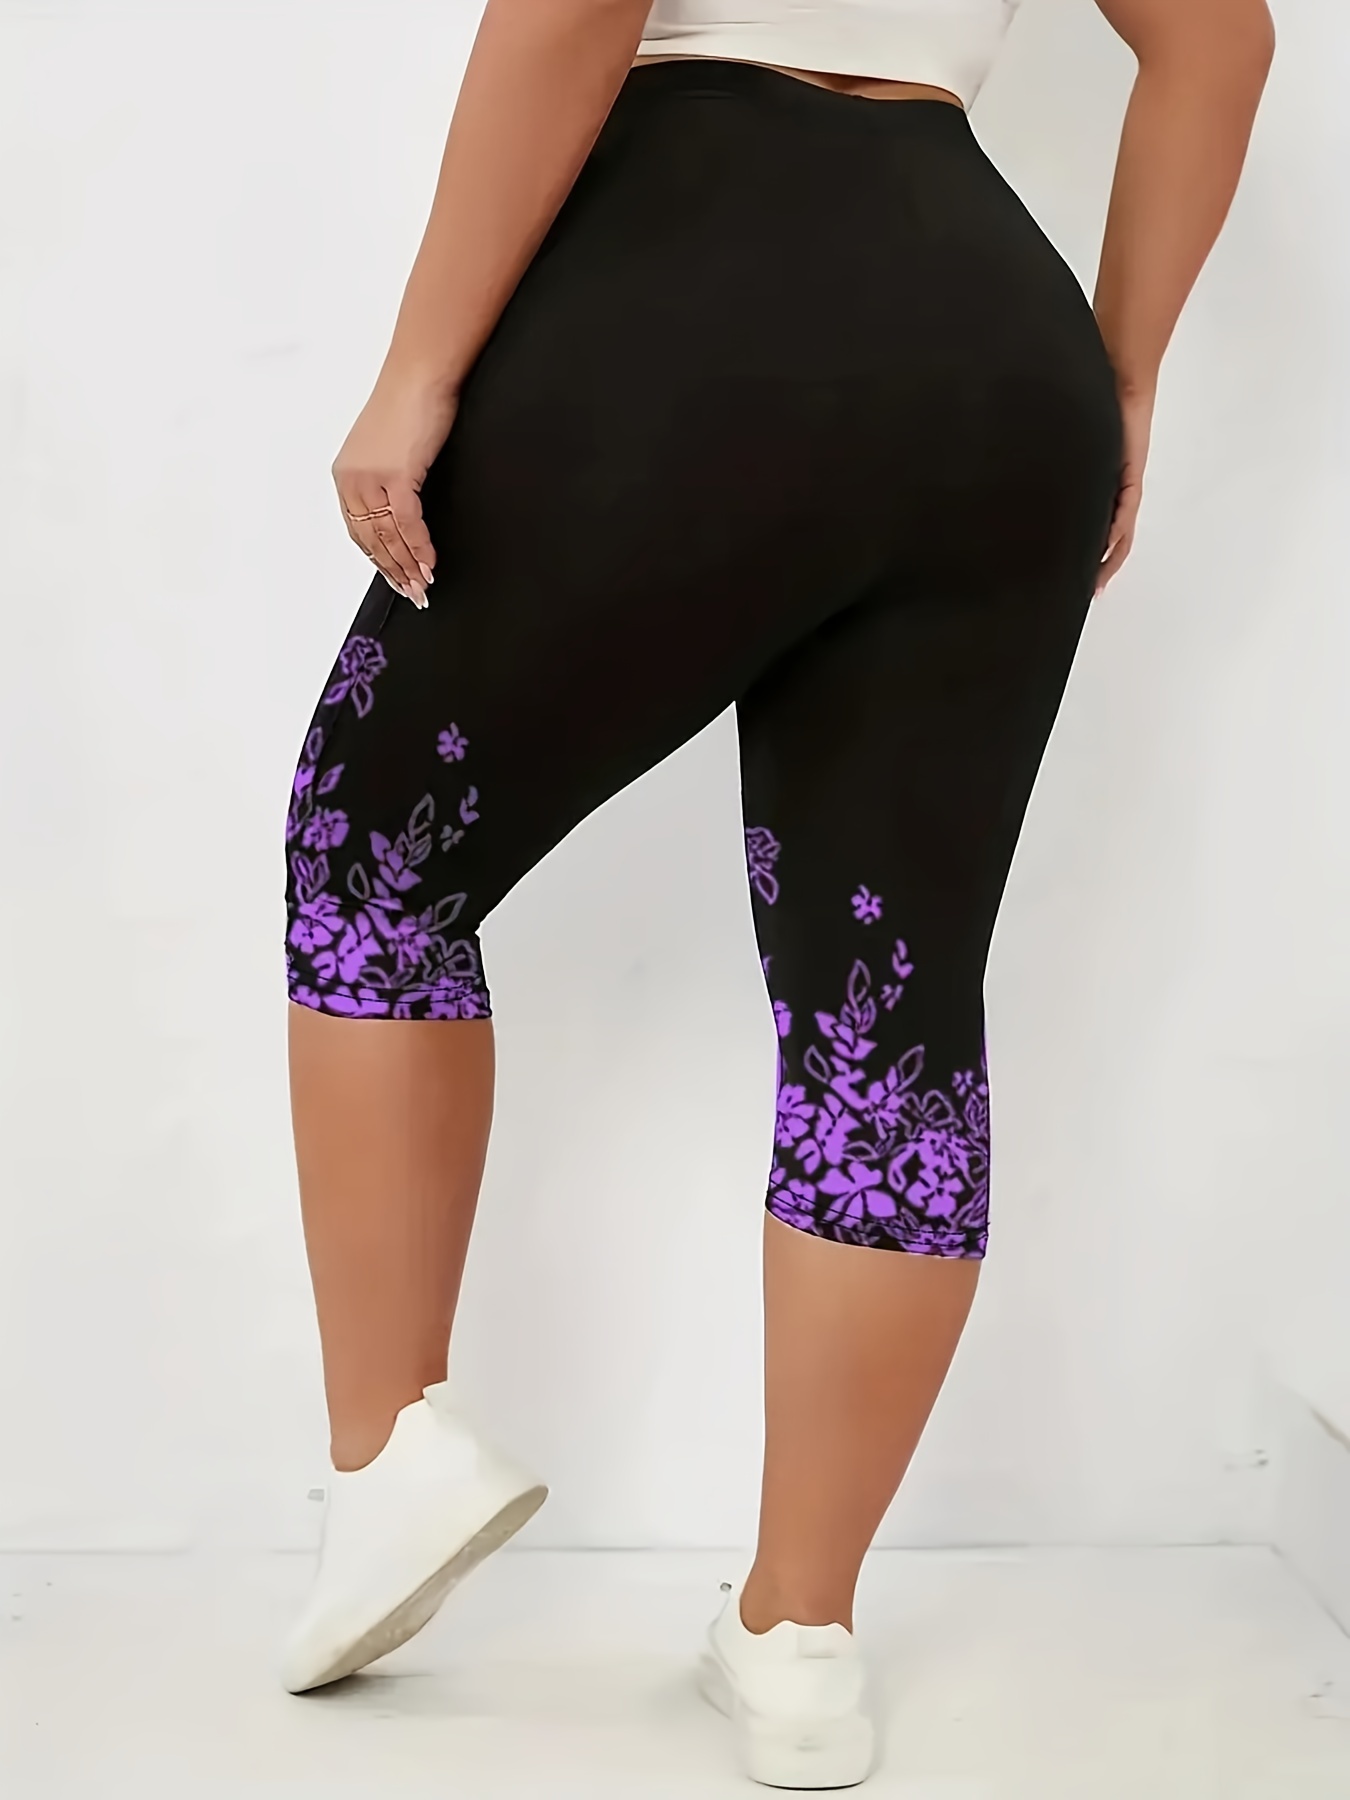 Floral Plus Size Leggings for Women Turquoise Palm Leaves High